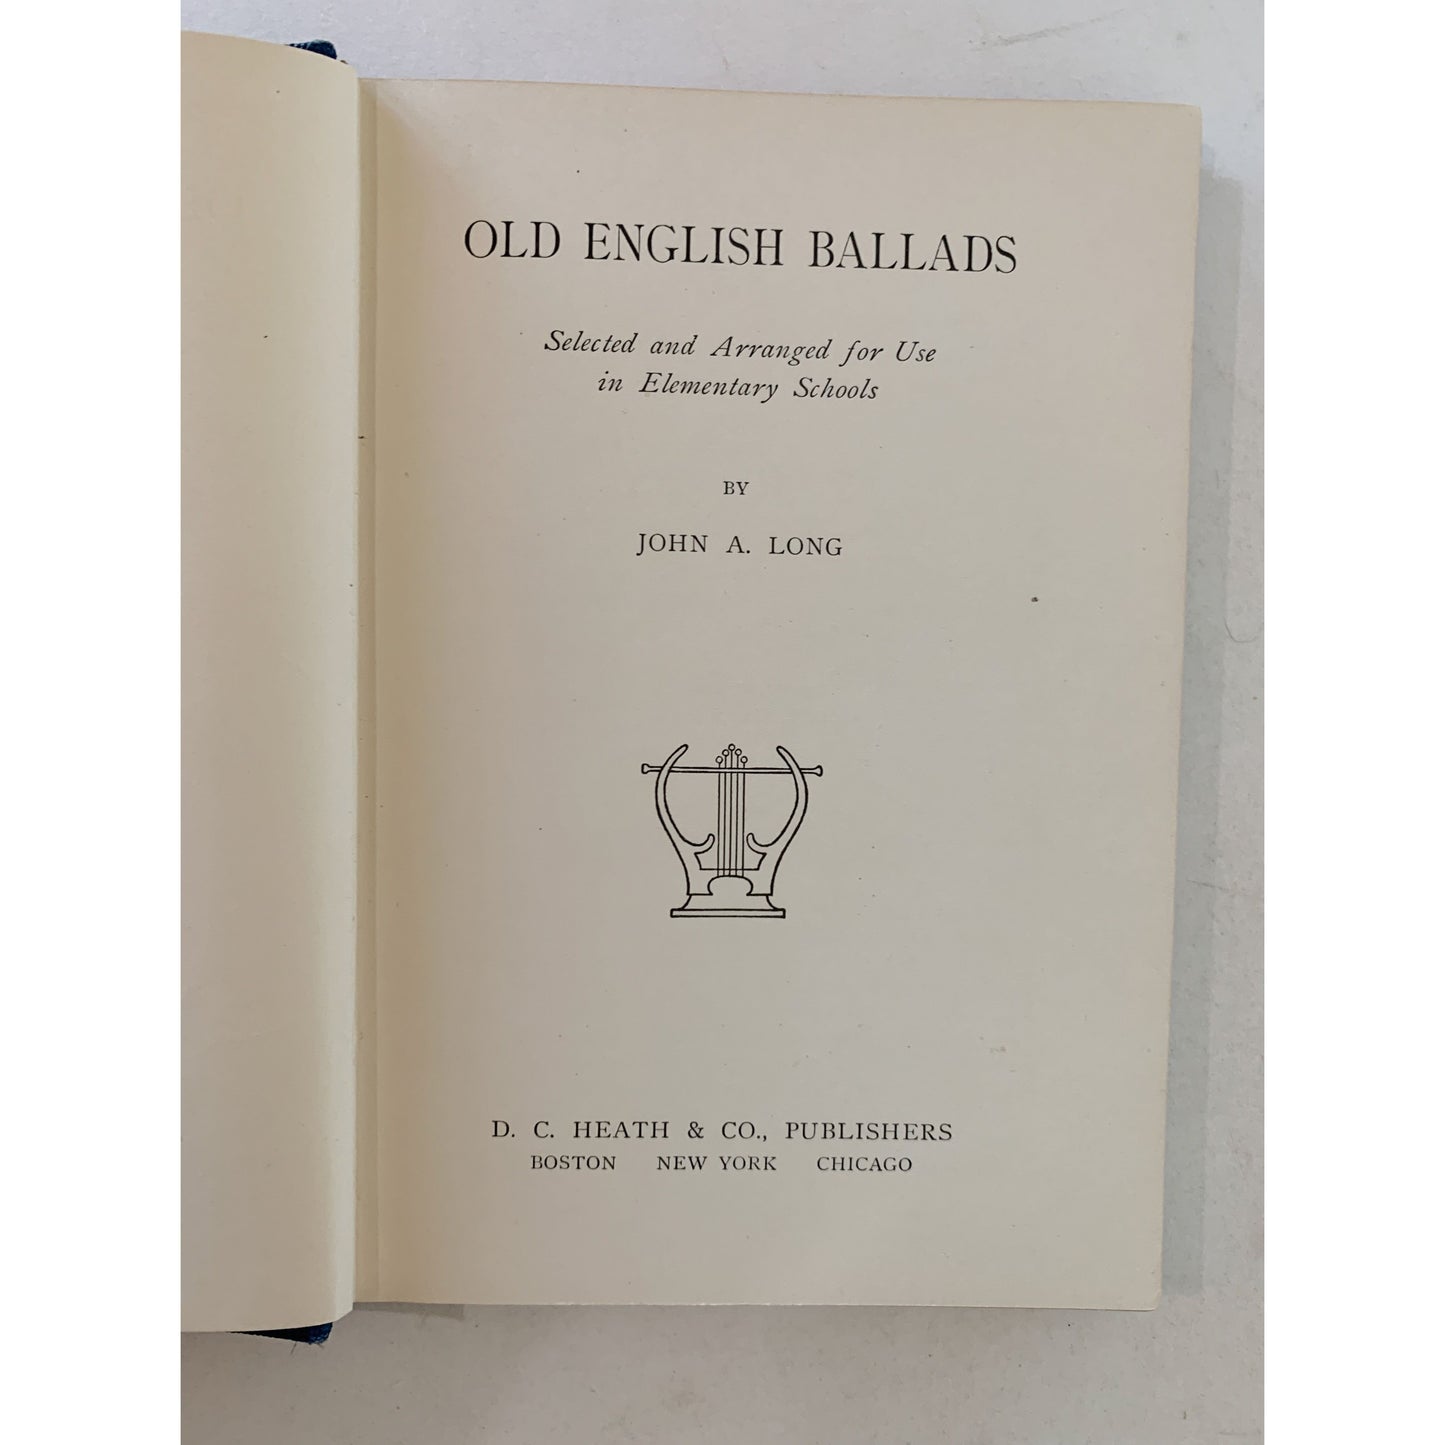 Old English Ballads for Elementary Schools, 1912, Antique School Book